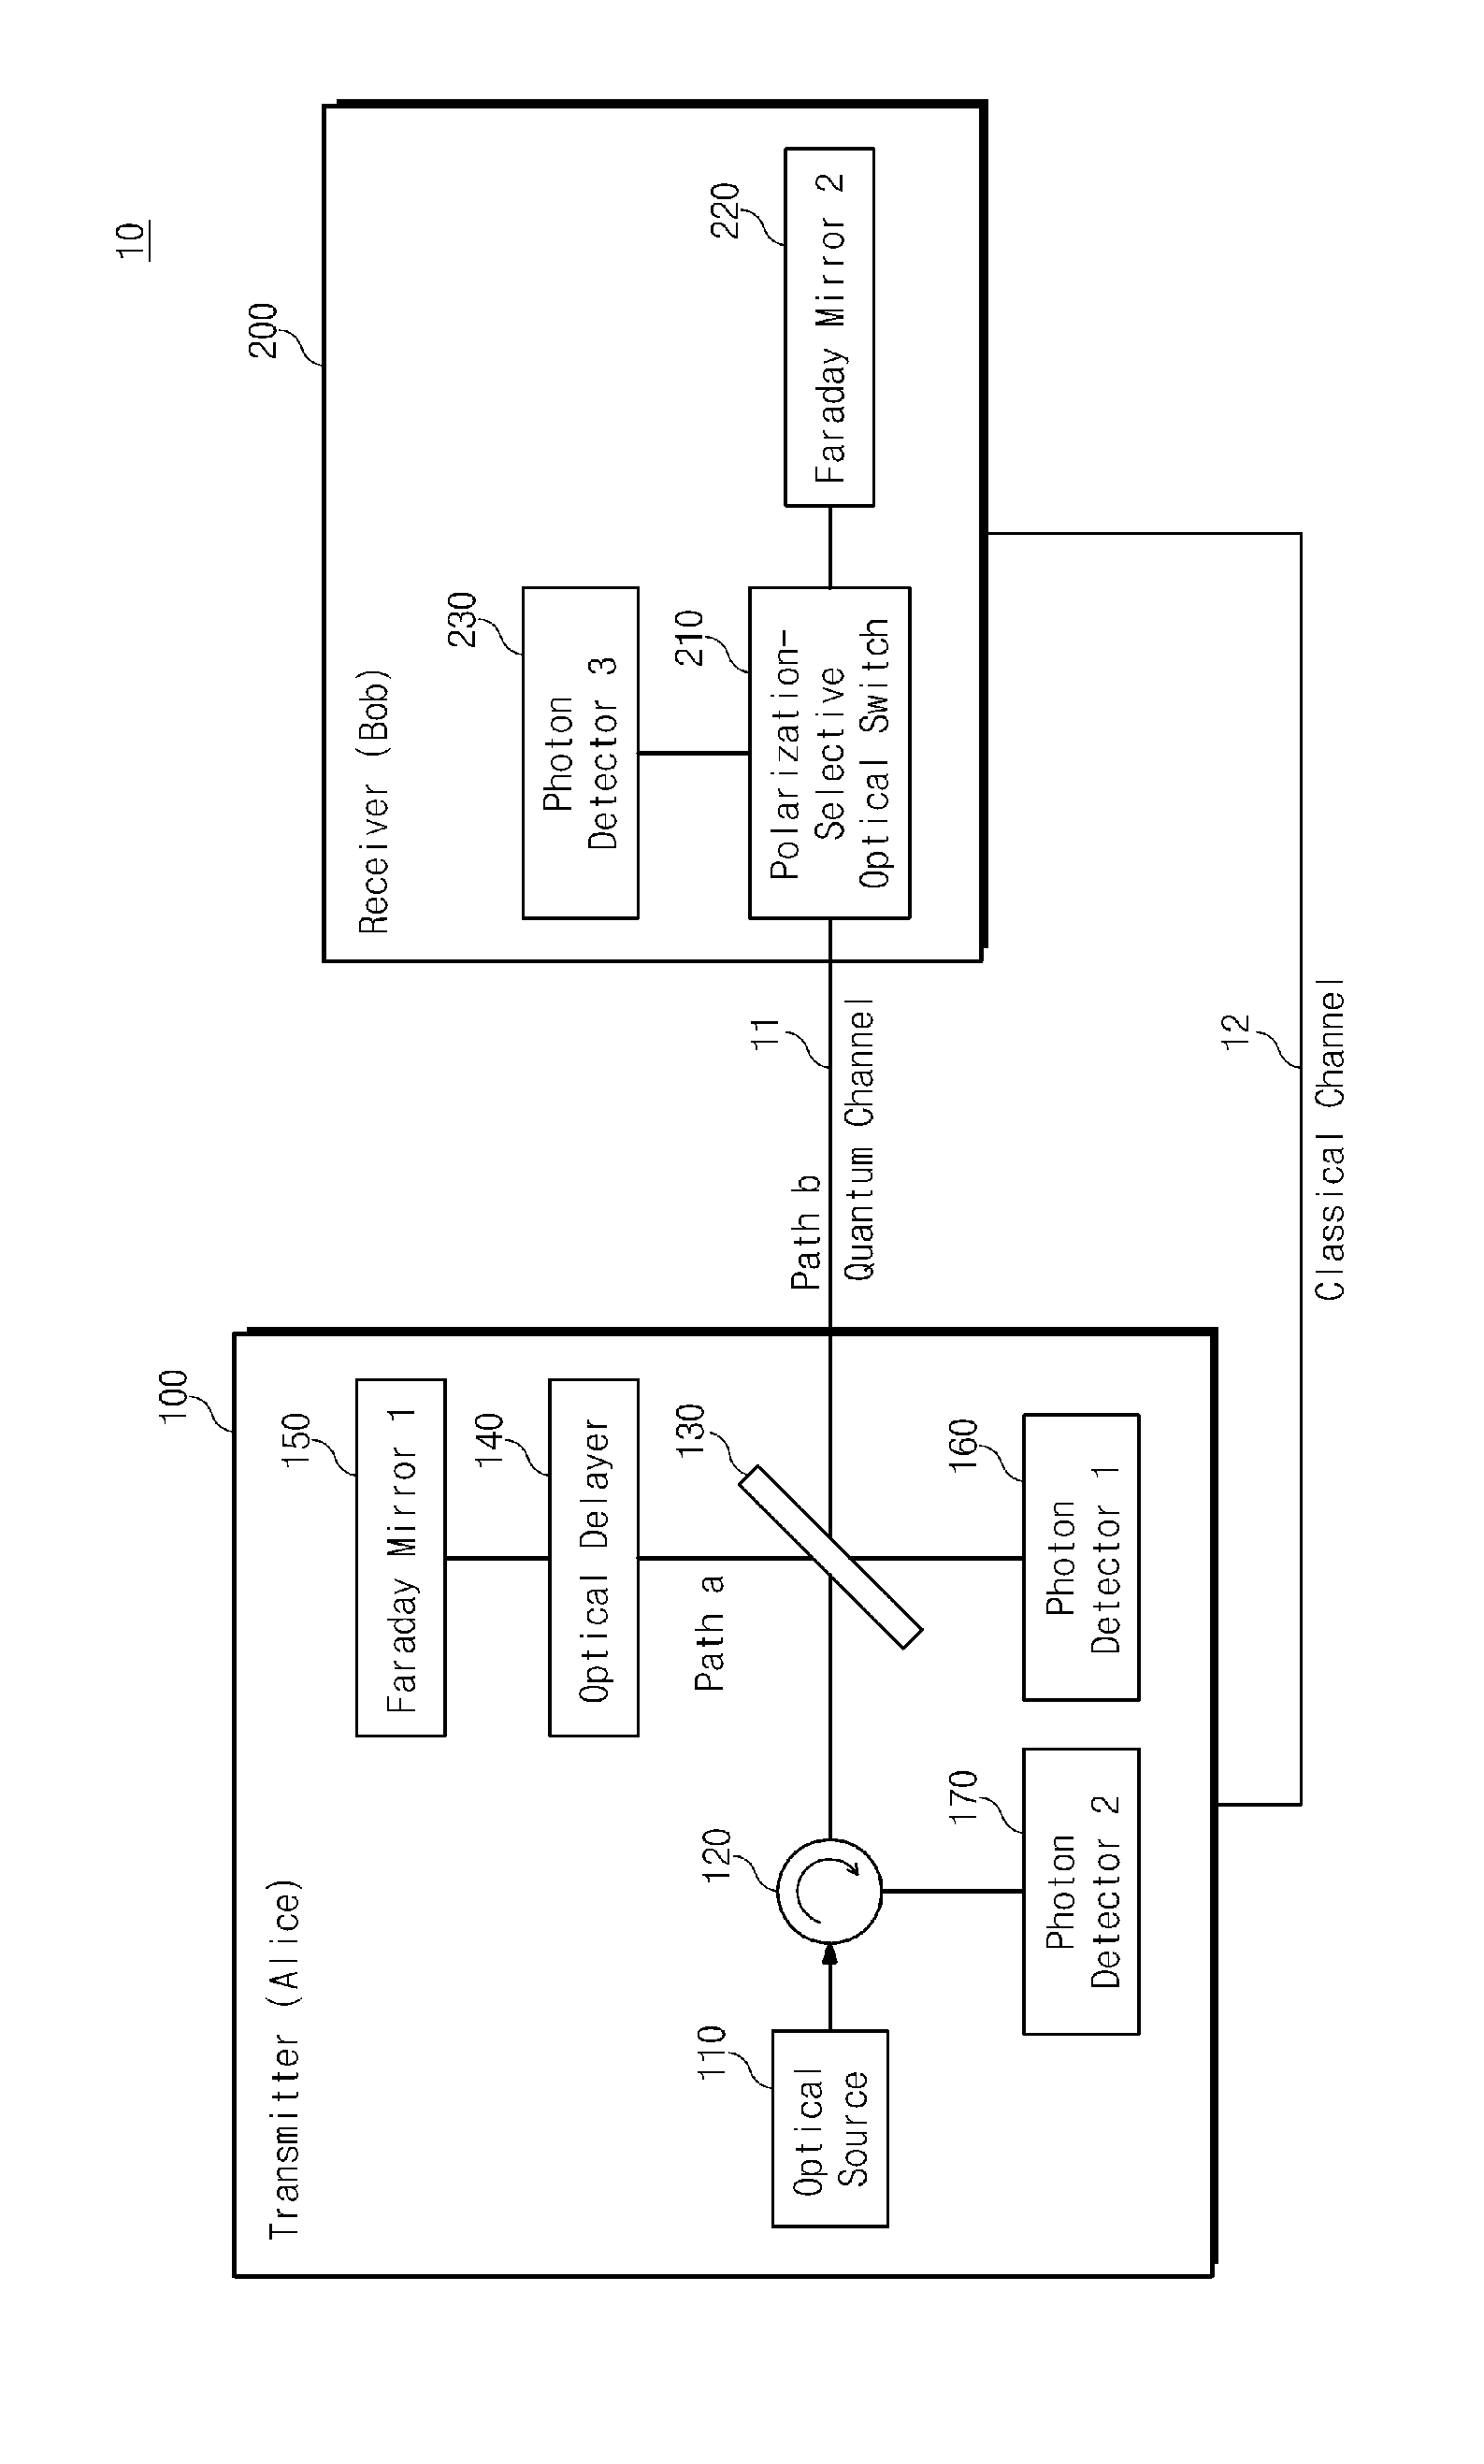 System and method for quantum cryptography